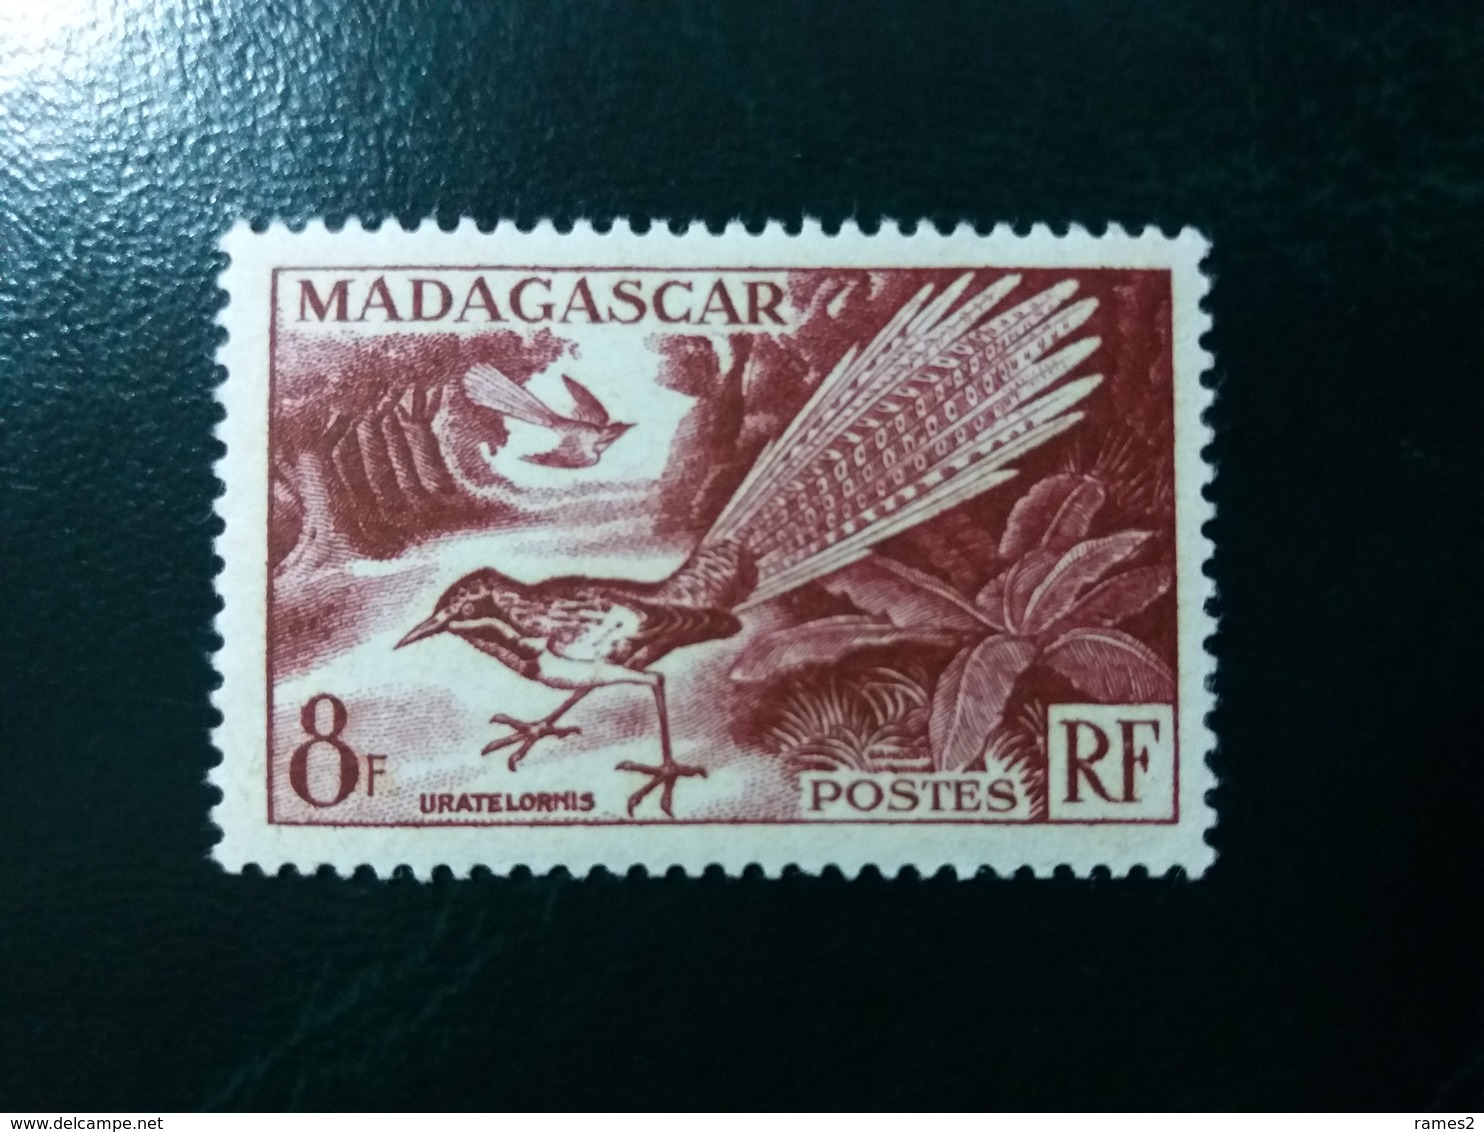 Timbres > Europe > France (ex-colonies & Protectorats) > Madagascar (1889-1960) > 1940-1960 > Neufs - Neufs